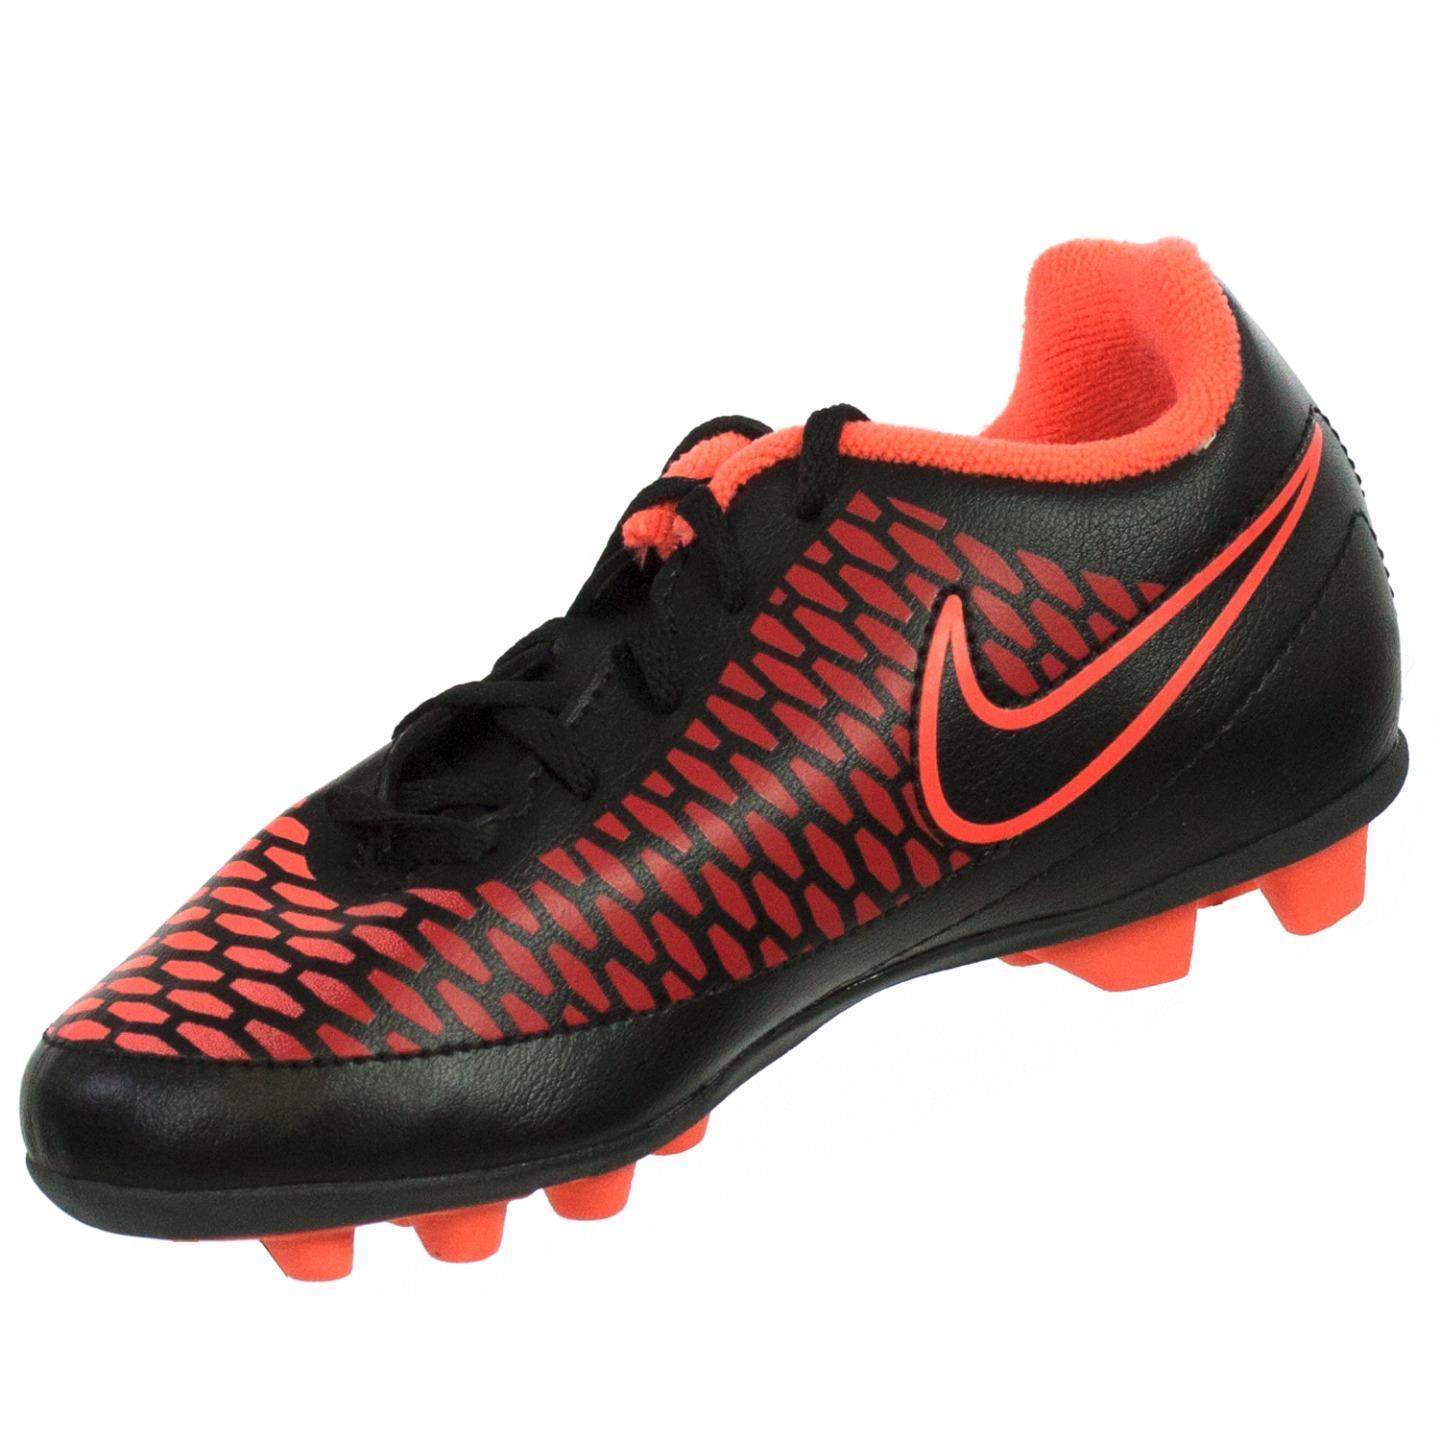 11c soccer cleats